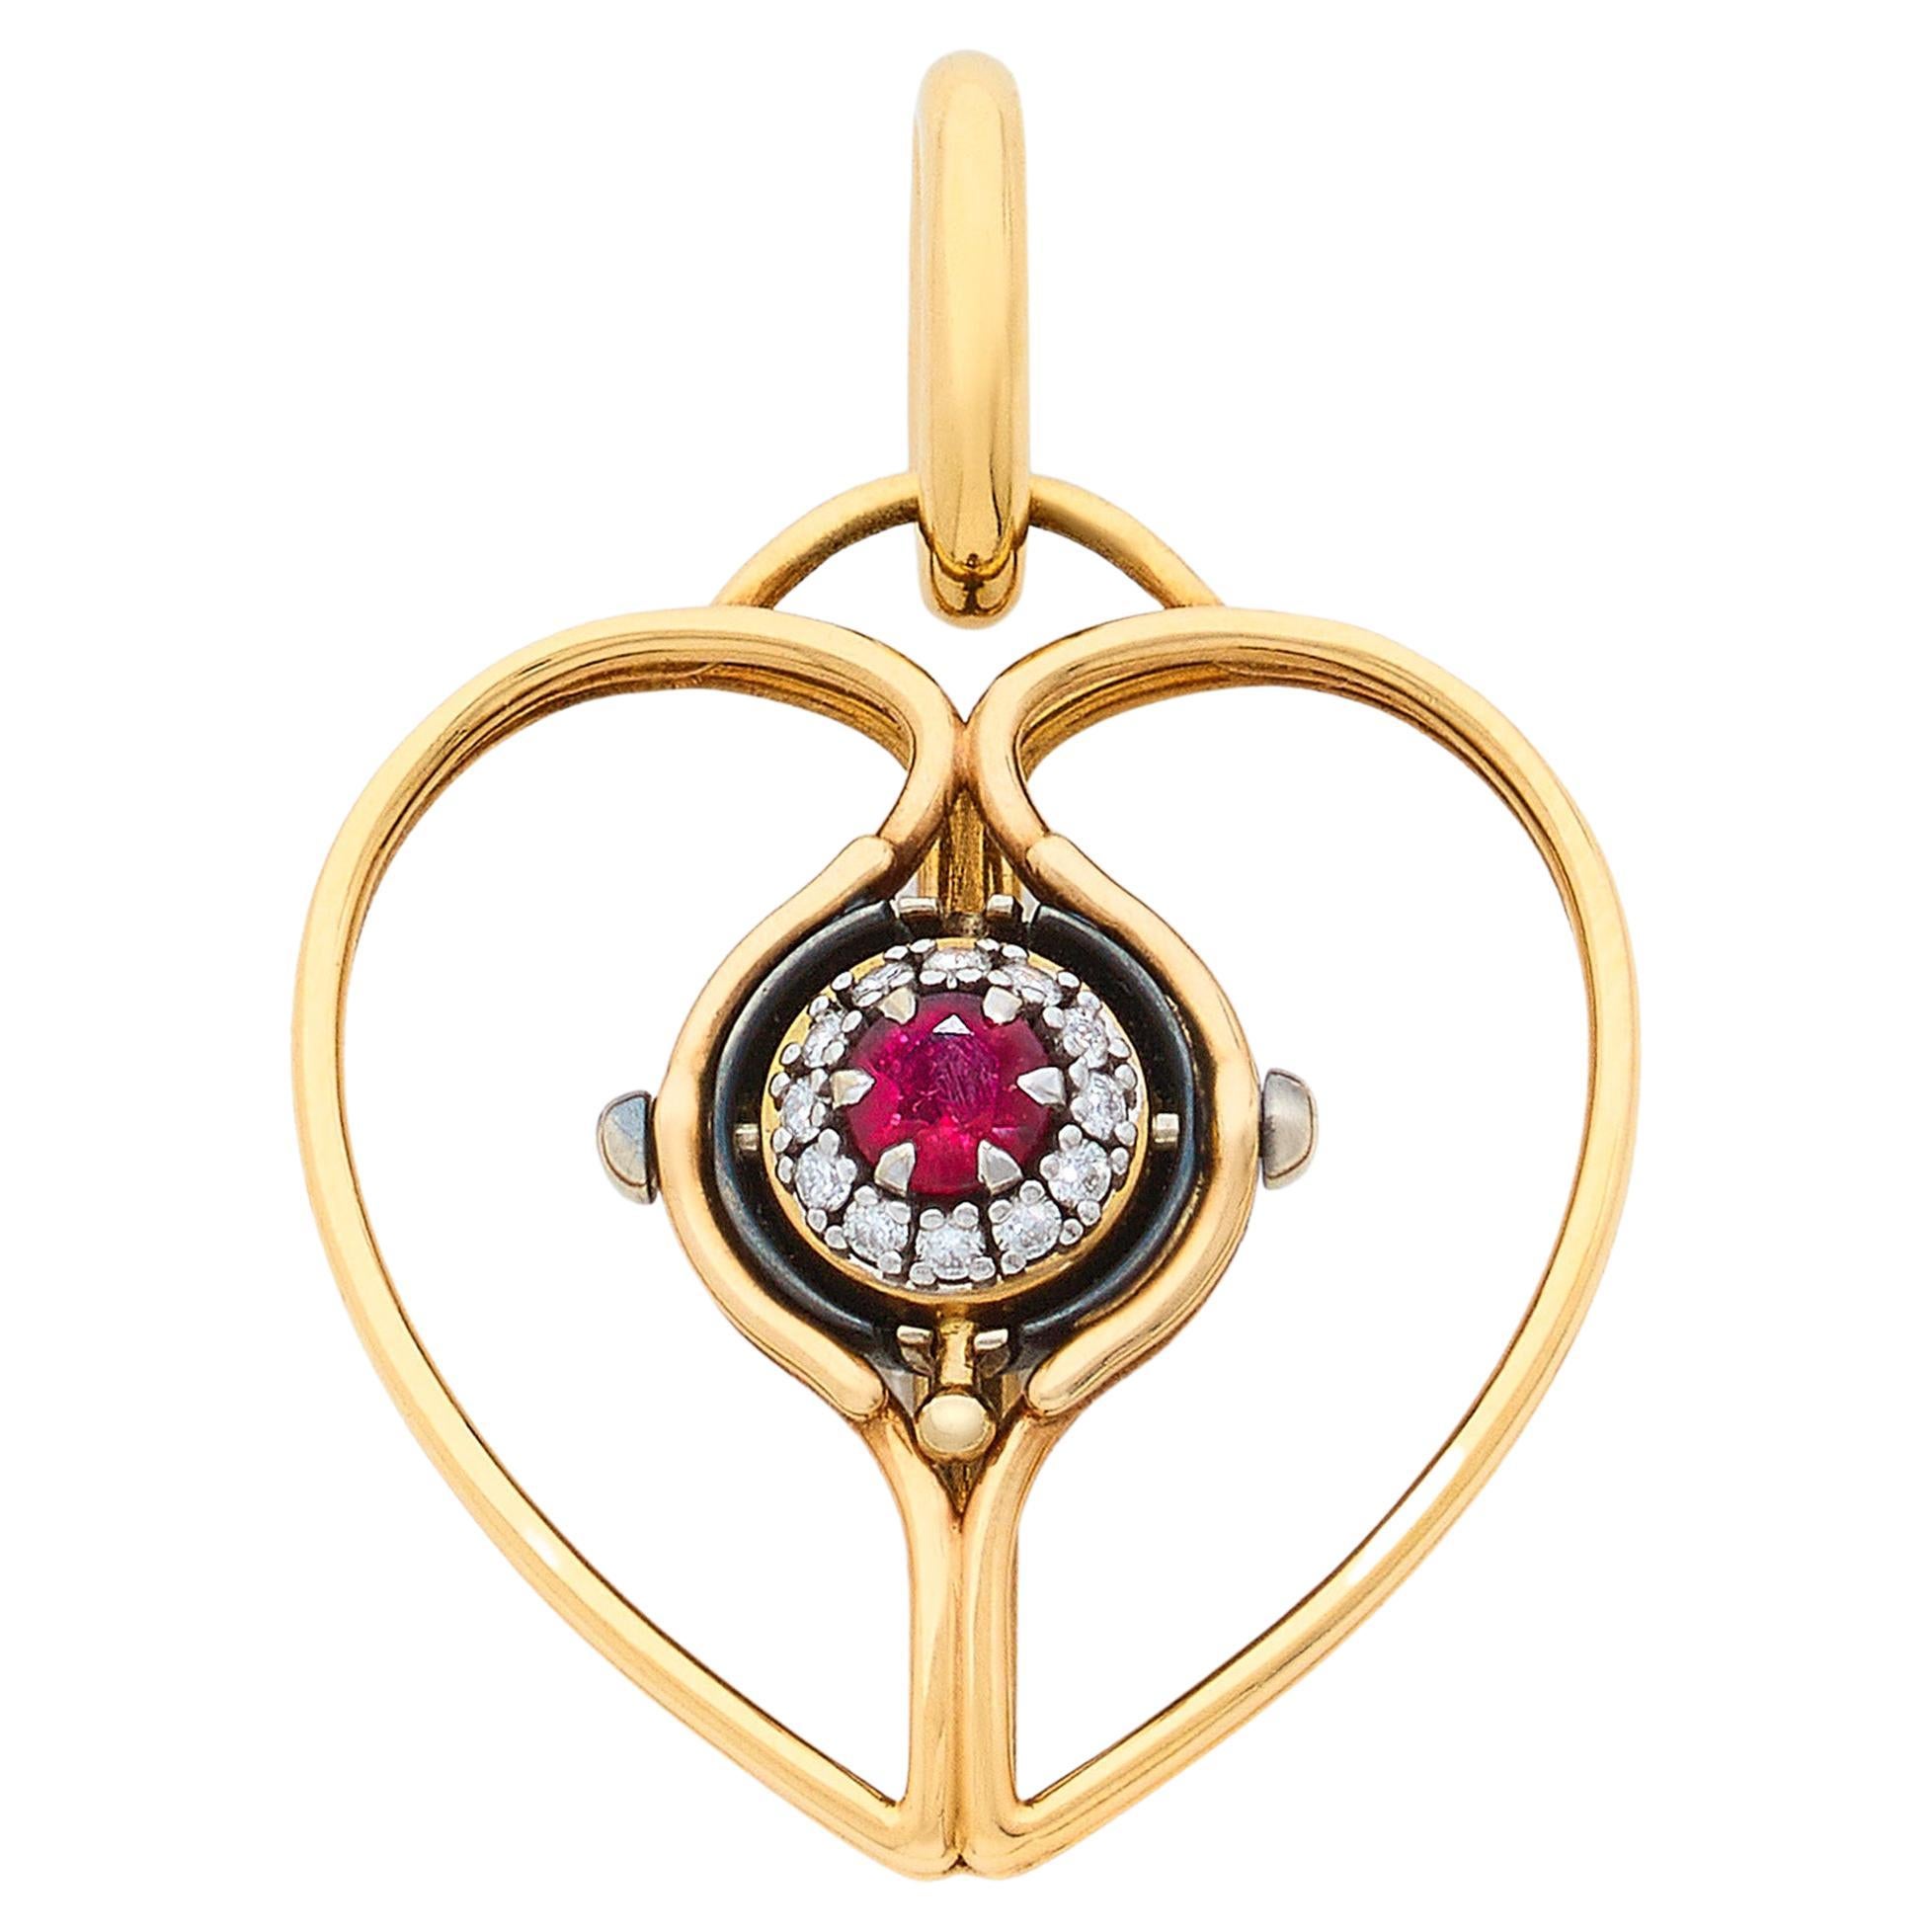 Mira Ruby Heart Charm in 18k Gold by Elie Top